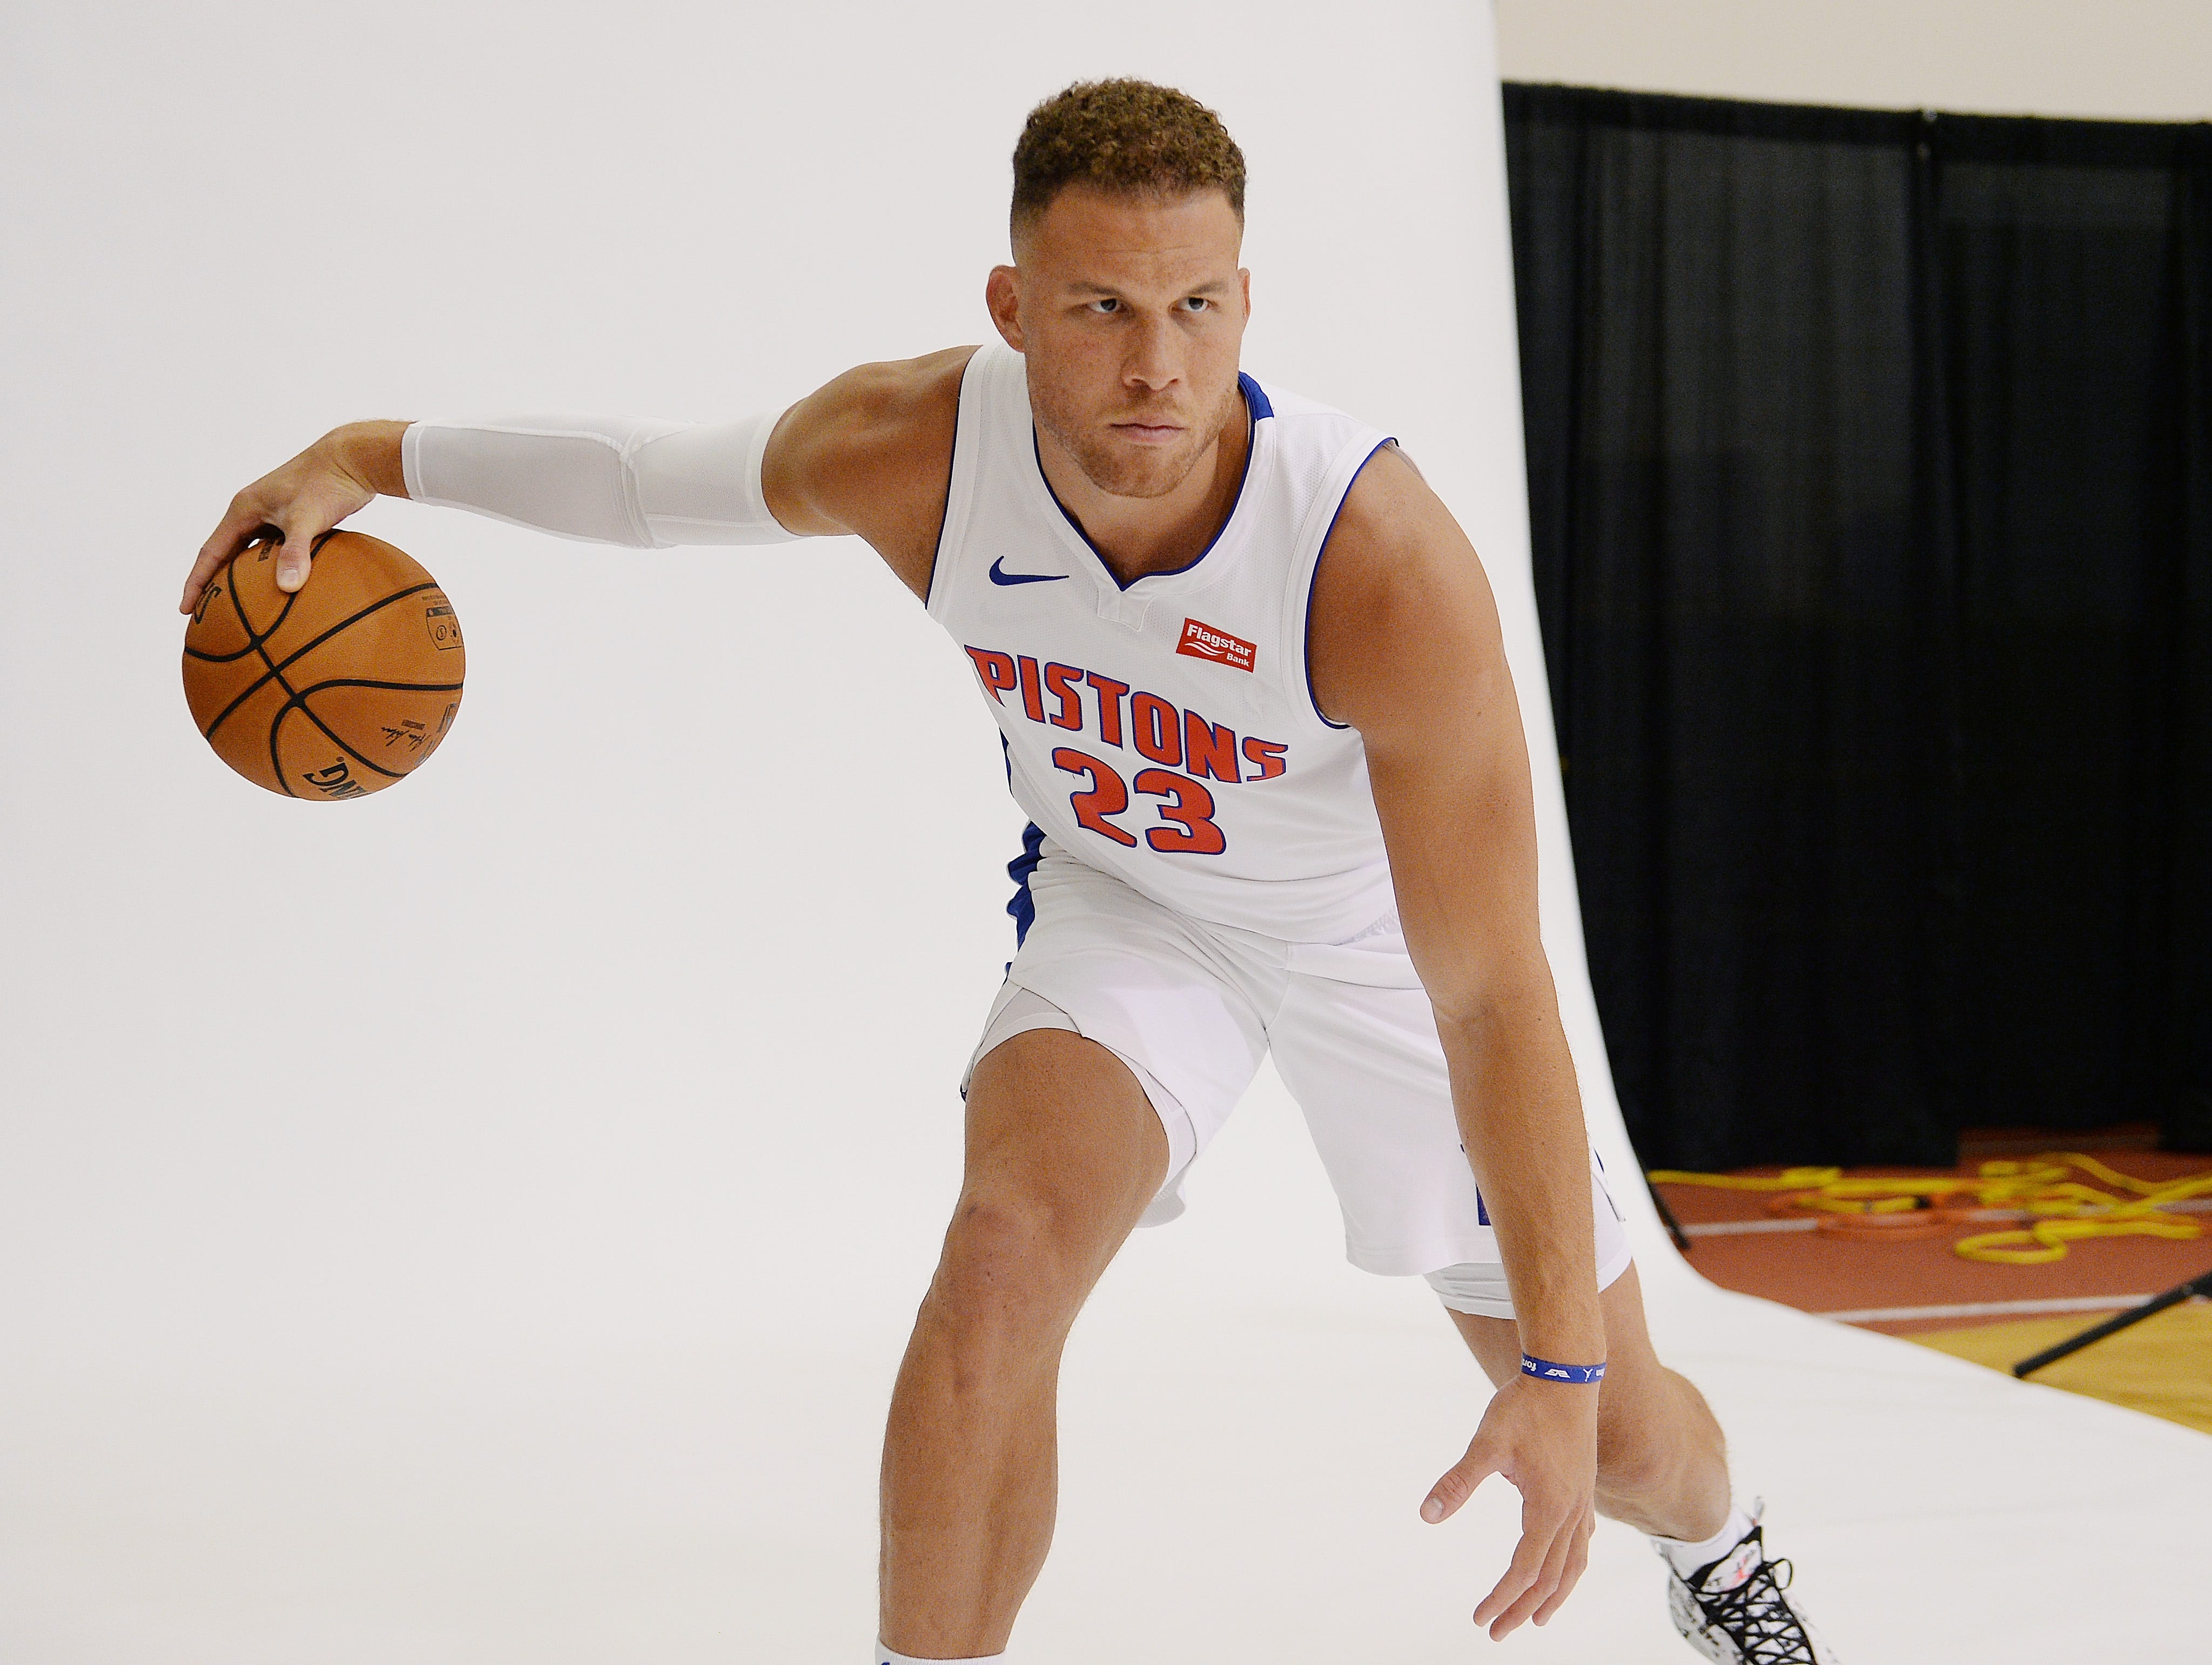 Blake Griffin shows off his dribbling skills during his photo shoot.